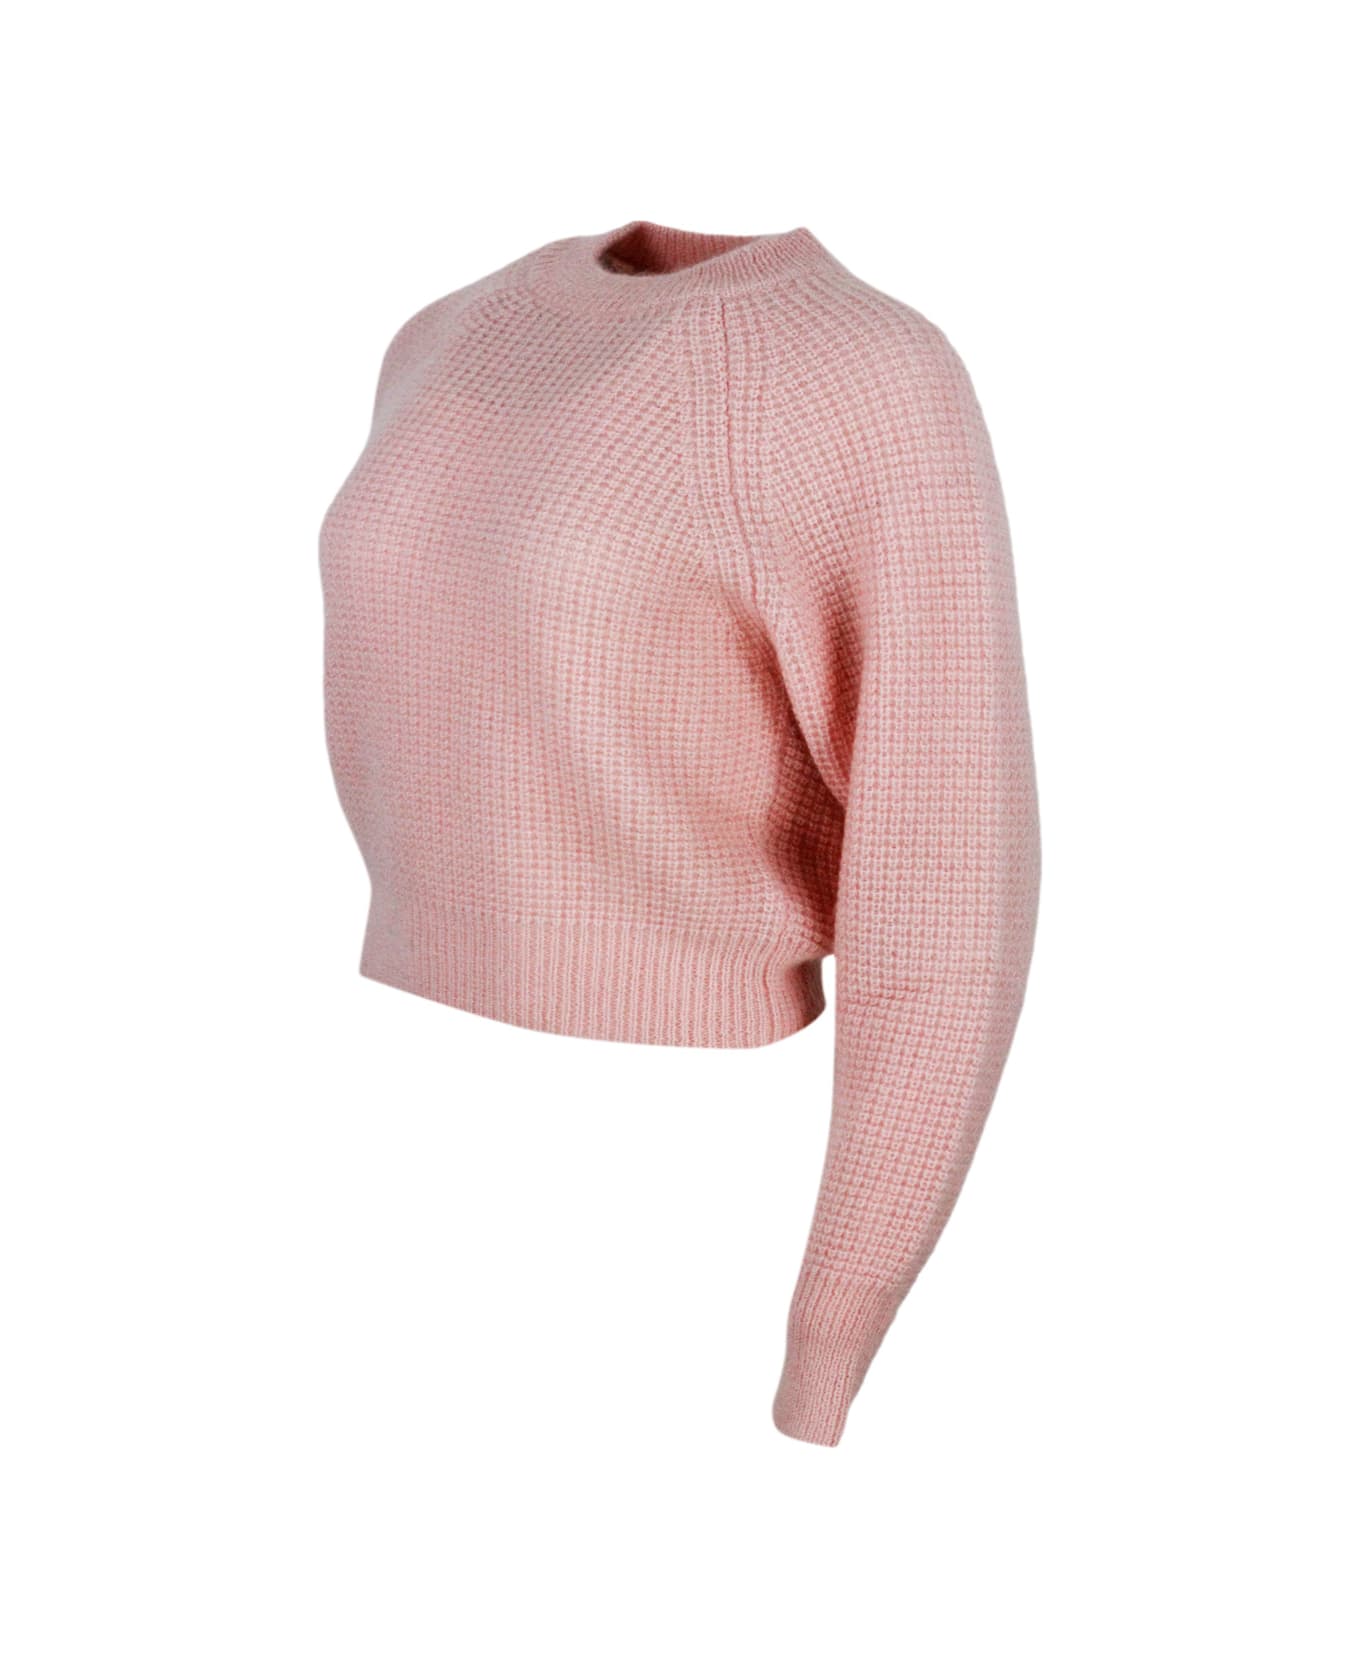 Fabiana Filippi Long-sleeved Crew-neck Sweater In Mohair, Cropped Model With Raglan Sleeves And Diamond Stitch Work - Pink